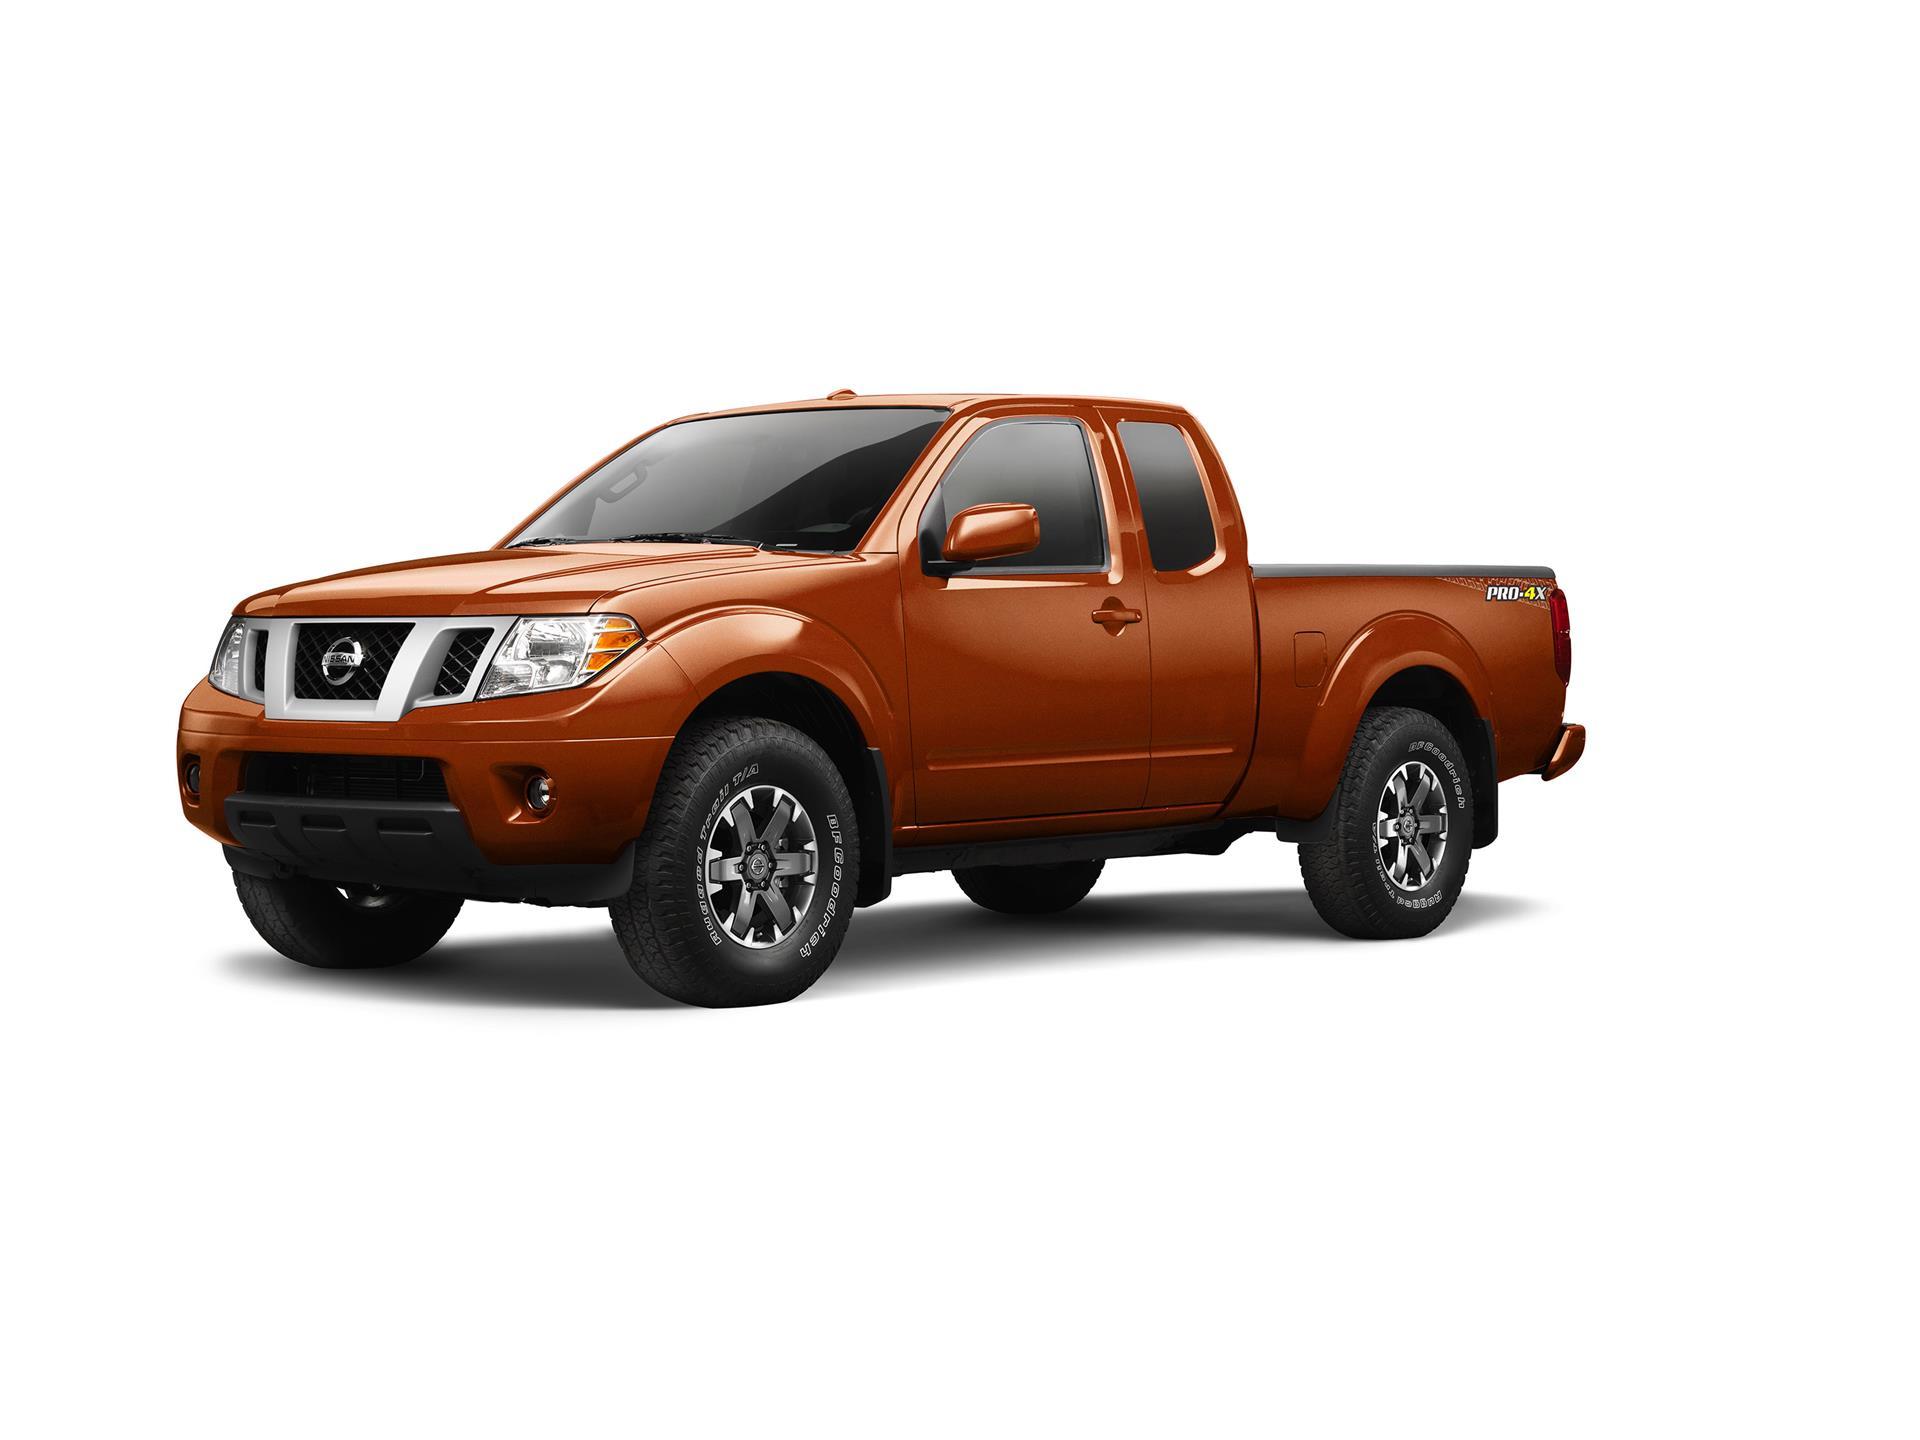 Nissan Frontier Wallpaper and Image Gallery